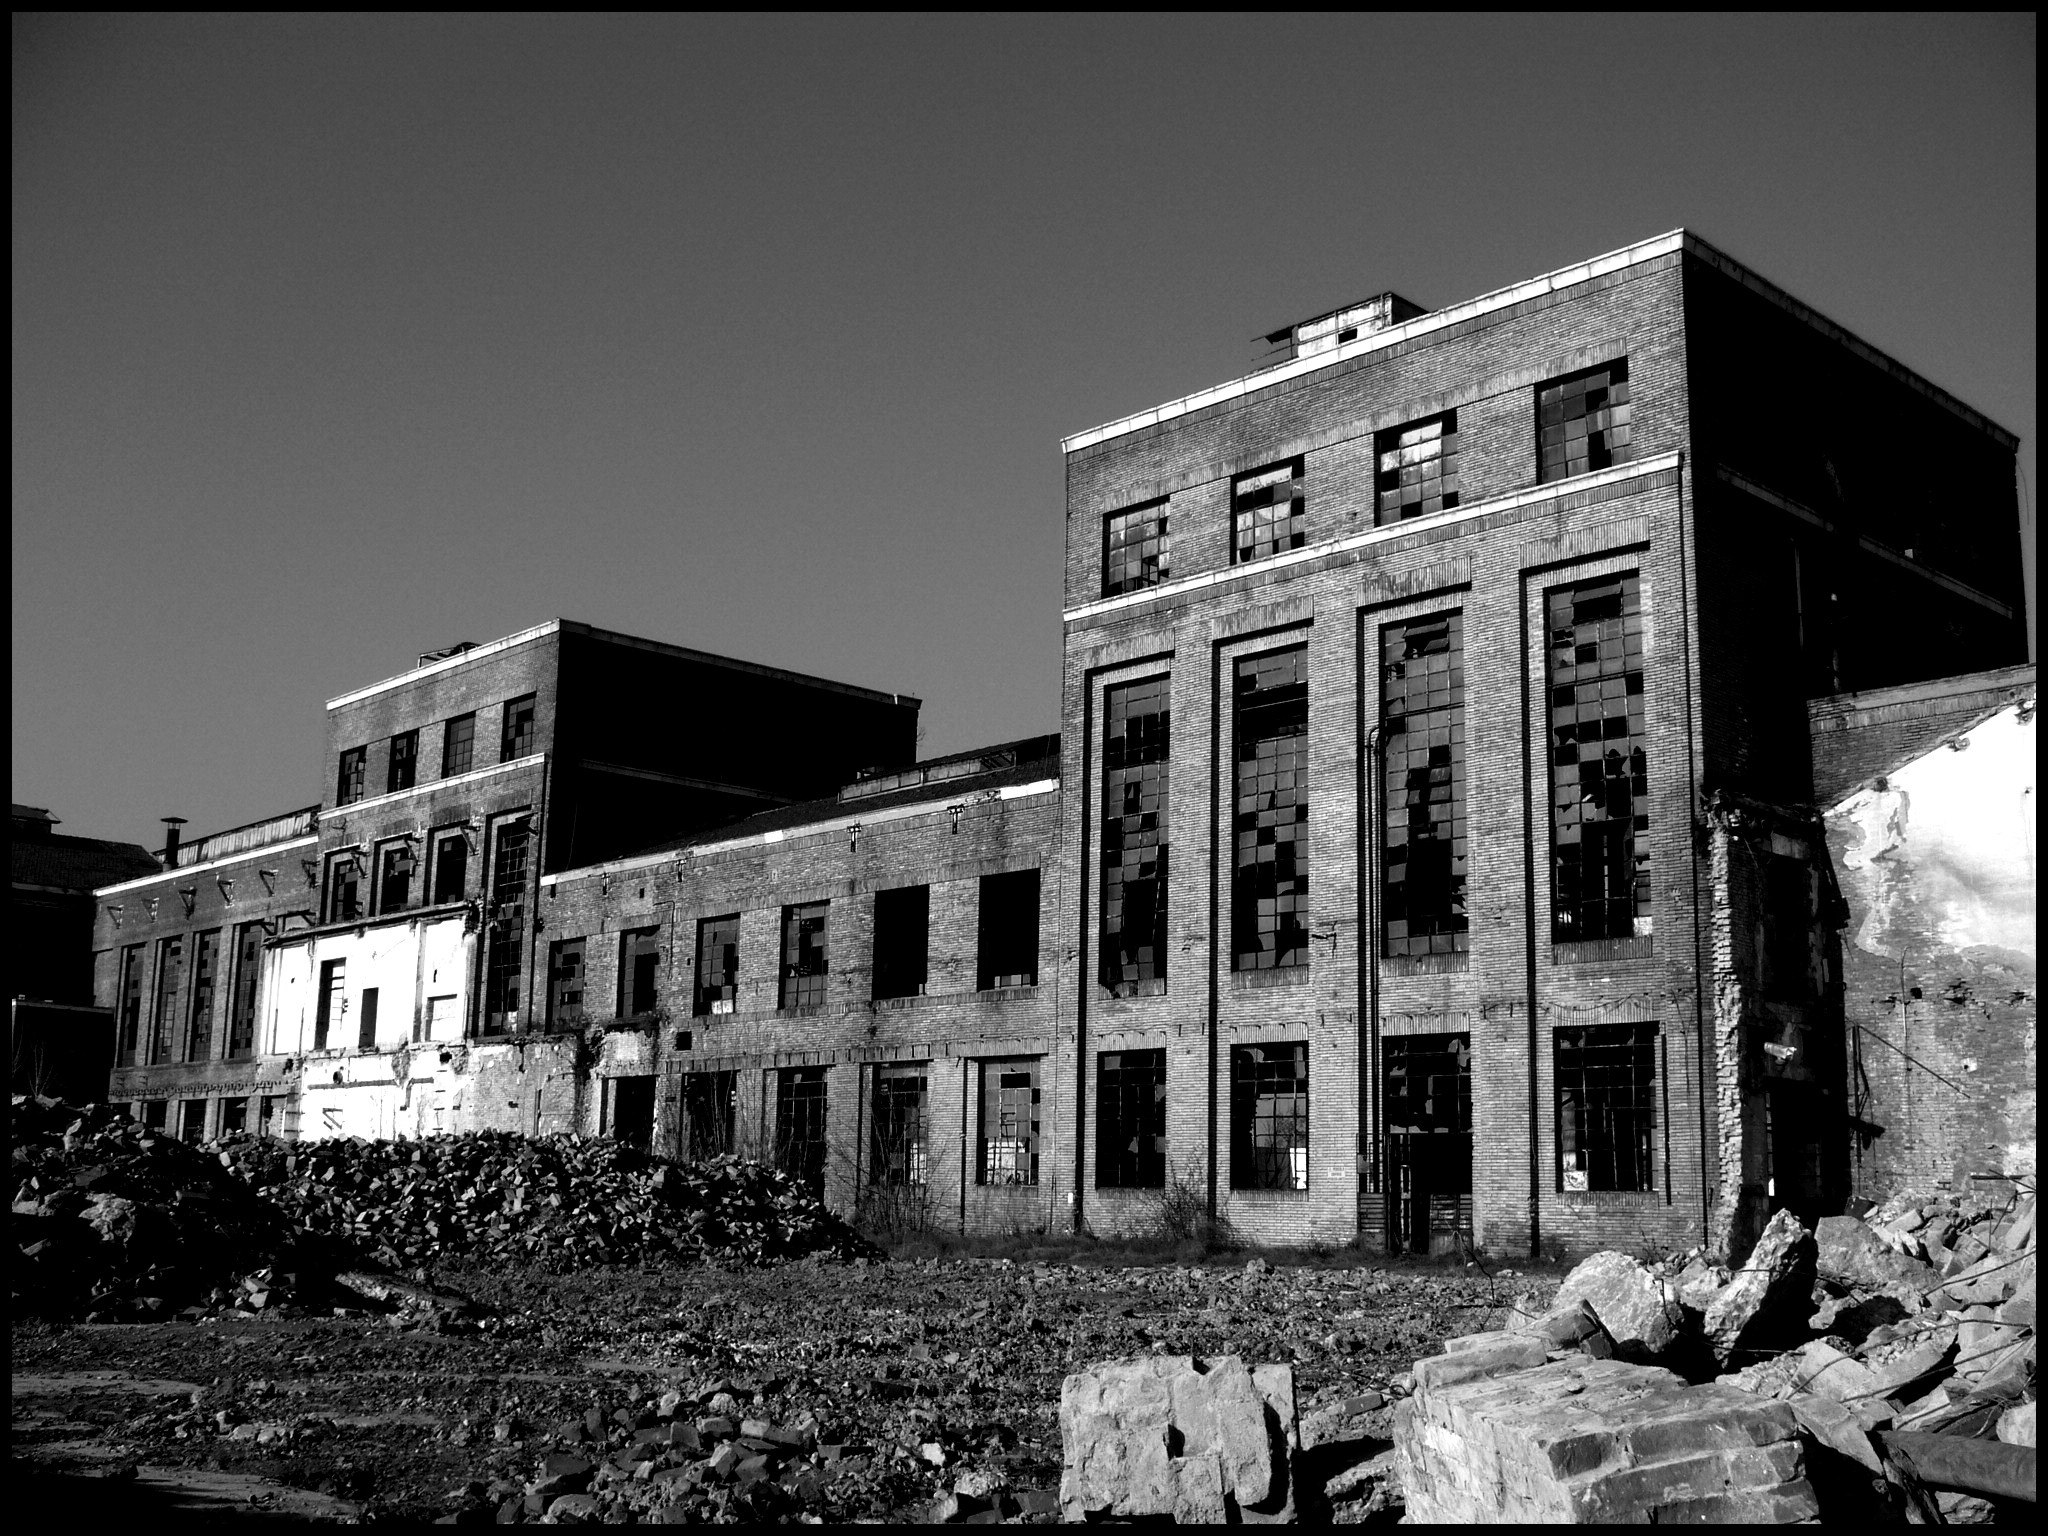 General 2048x1536 monochrome building old building abandoned urban decay ruins